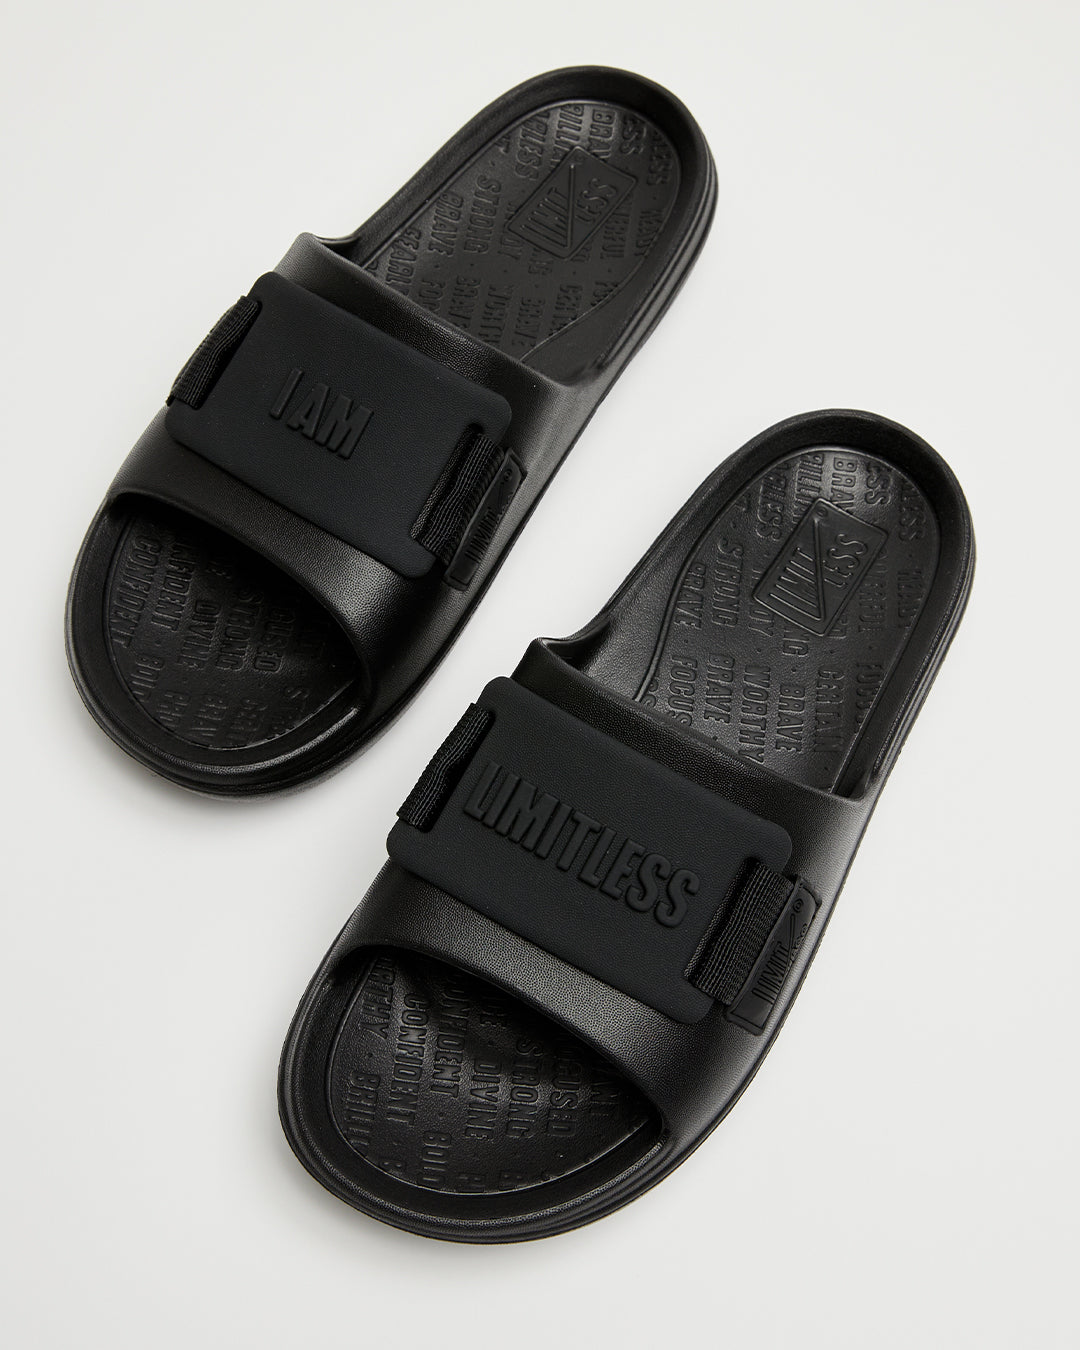 LIMITLESS SLIDES™ WITH ESSENTIAL TIBAH™ QUAD - SOMERSET ACADEMY BAY EDITION